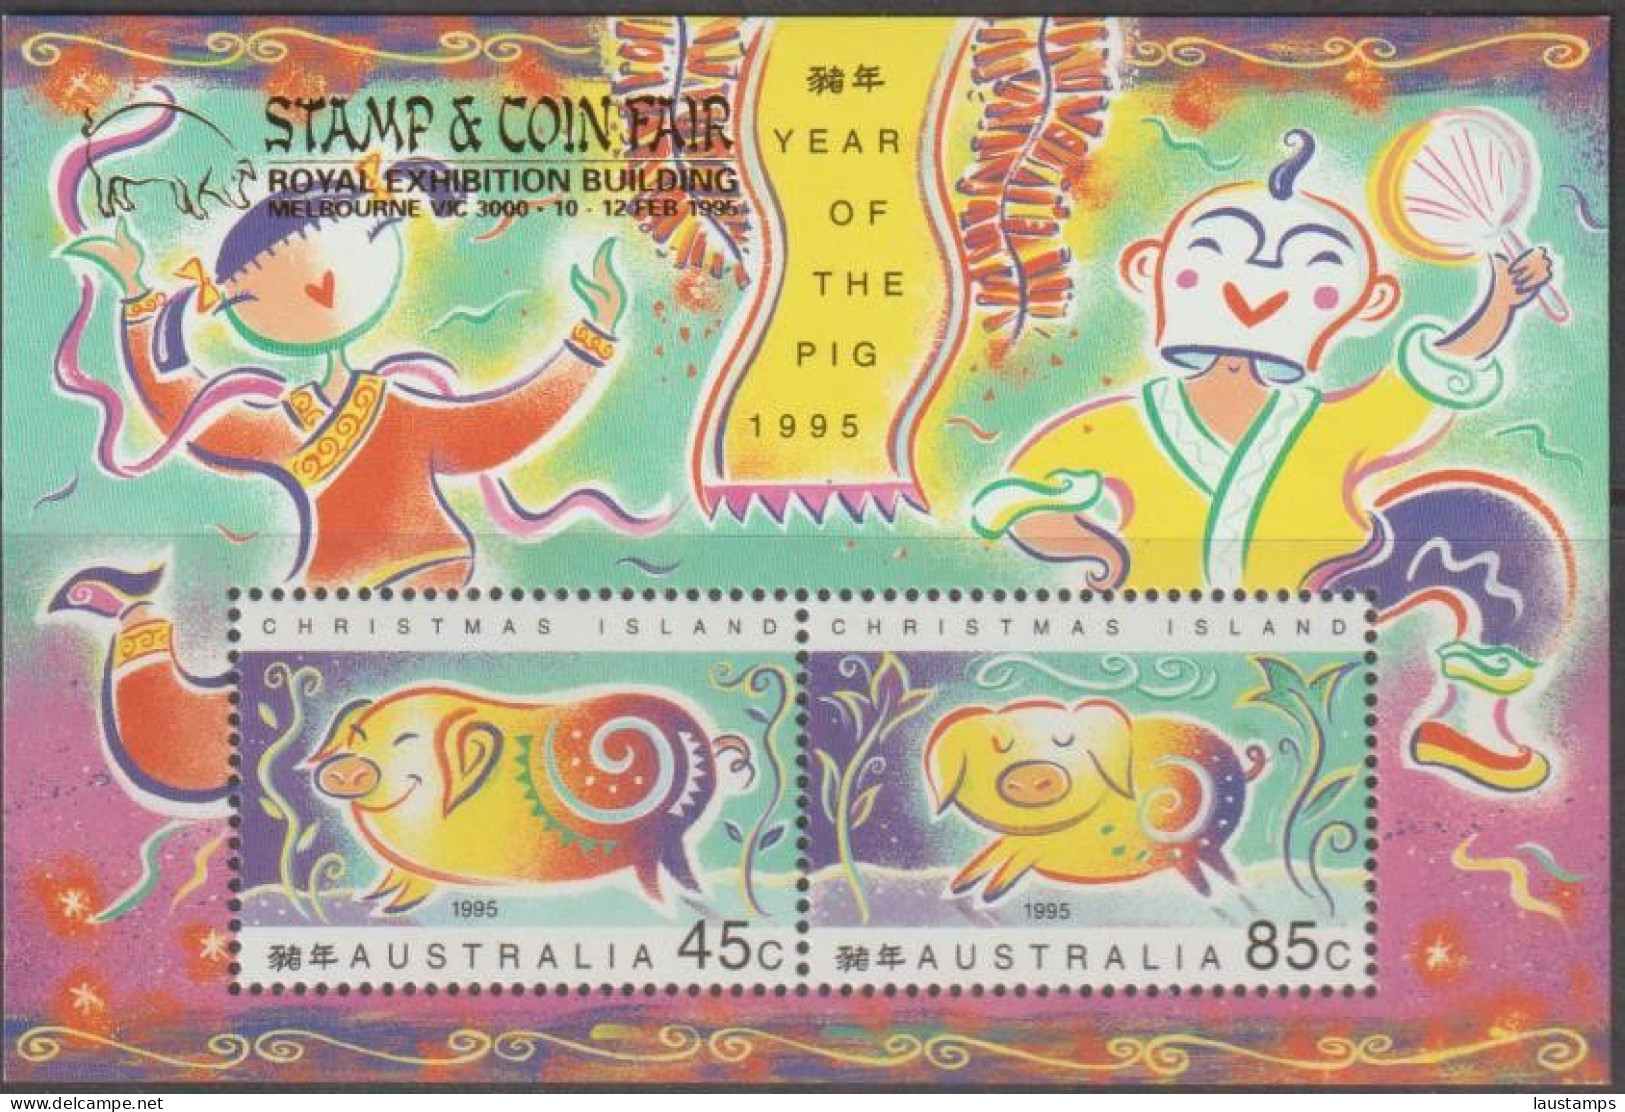 Christmas Island 1995 Year Of The Pig Ovpt Stamp & Coin Fair Melbourne S/S MNH - Año Nuevo Chino